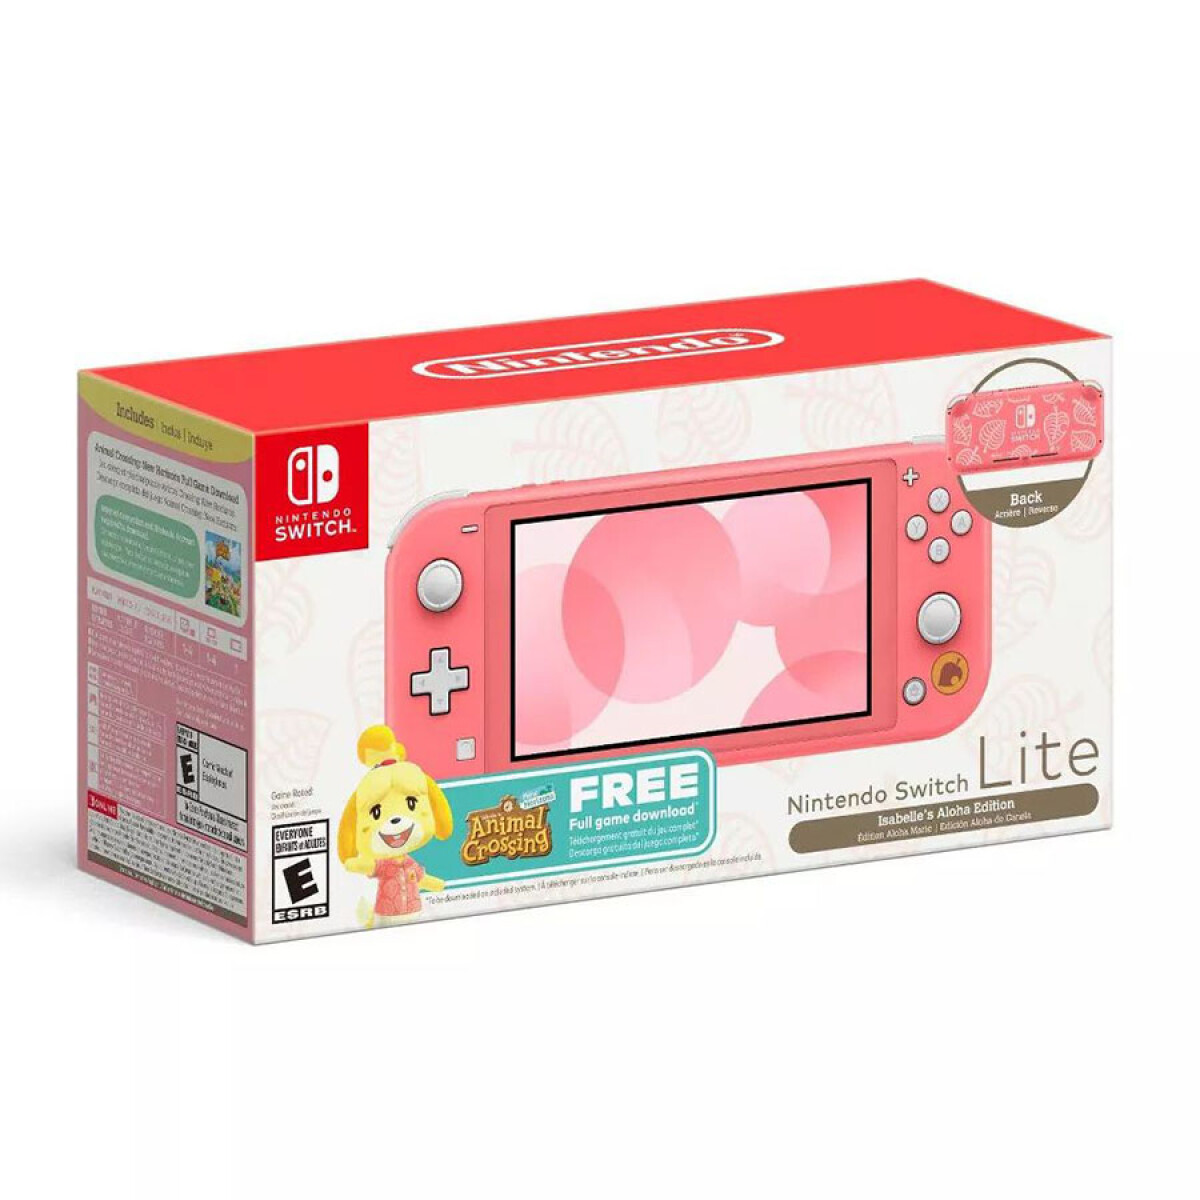 Nintendo Switch Lite: Animal Crossing Edition - Coral 